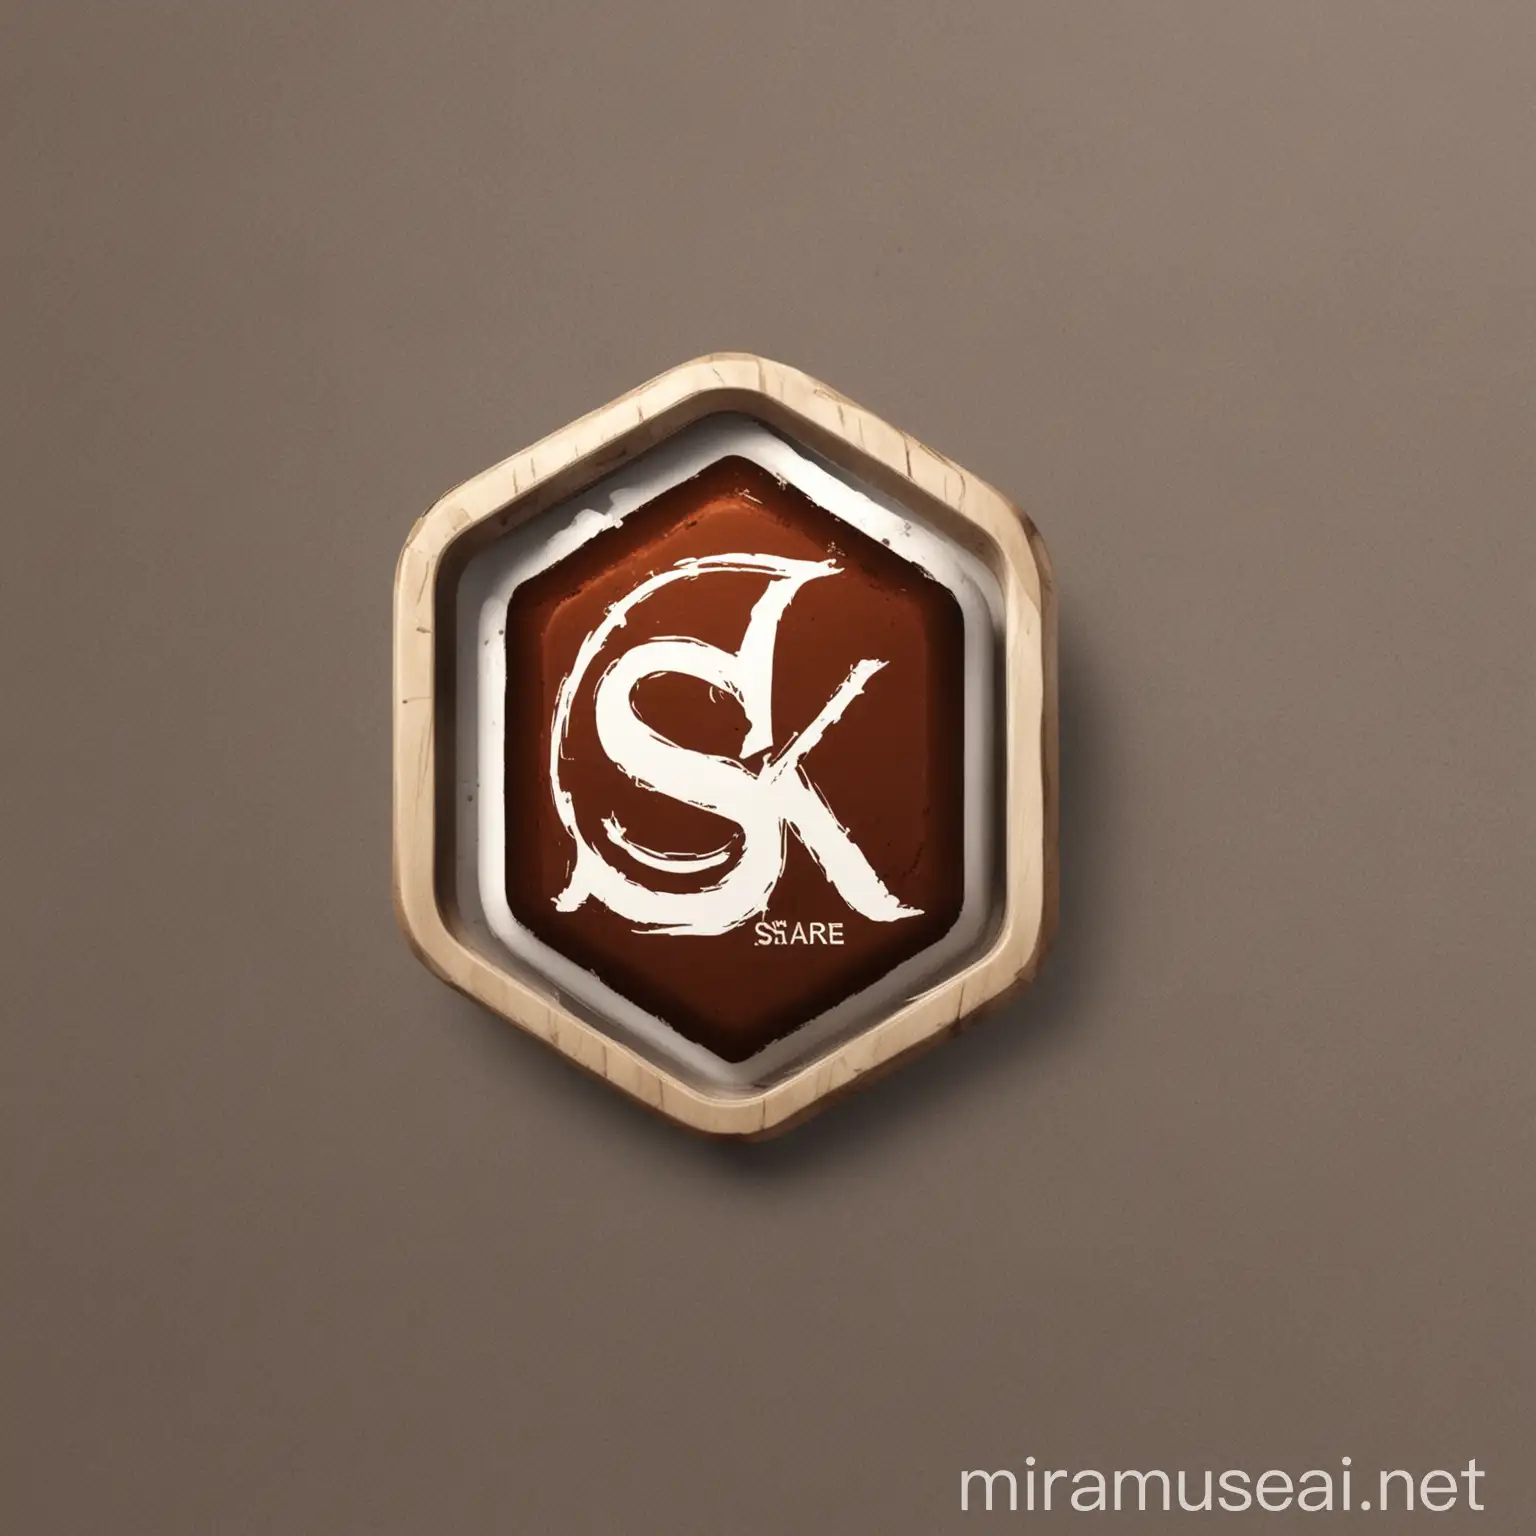 A stylish classic logo for an online store called SK Store